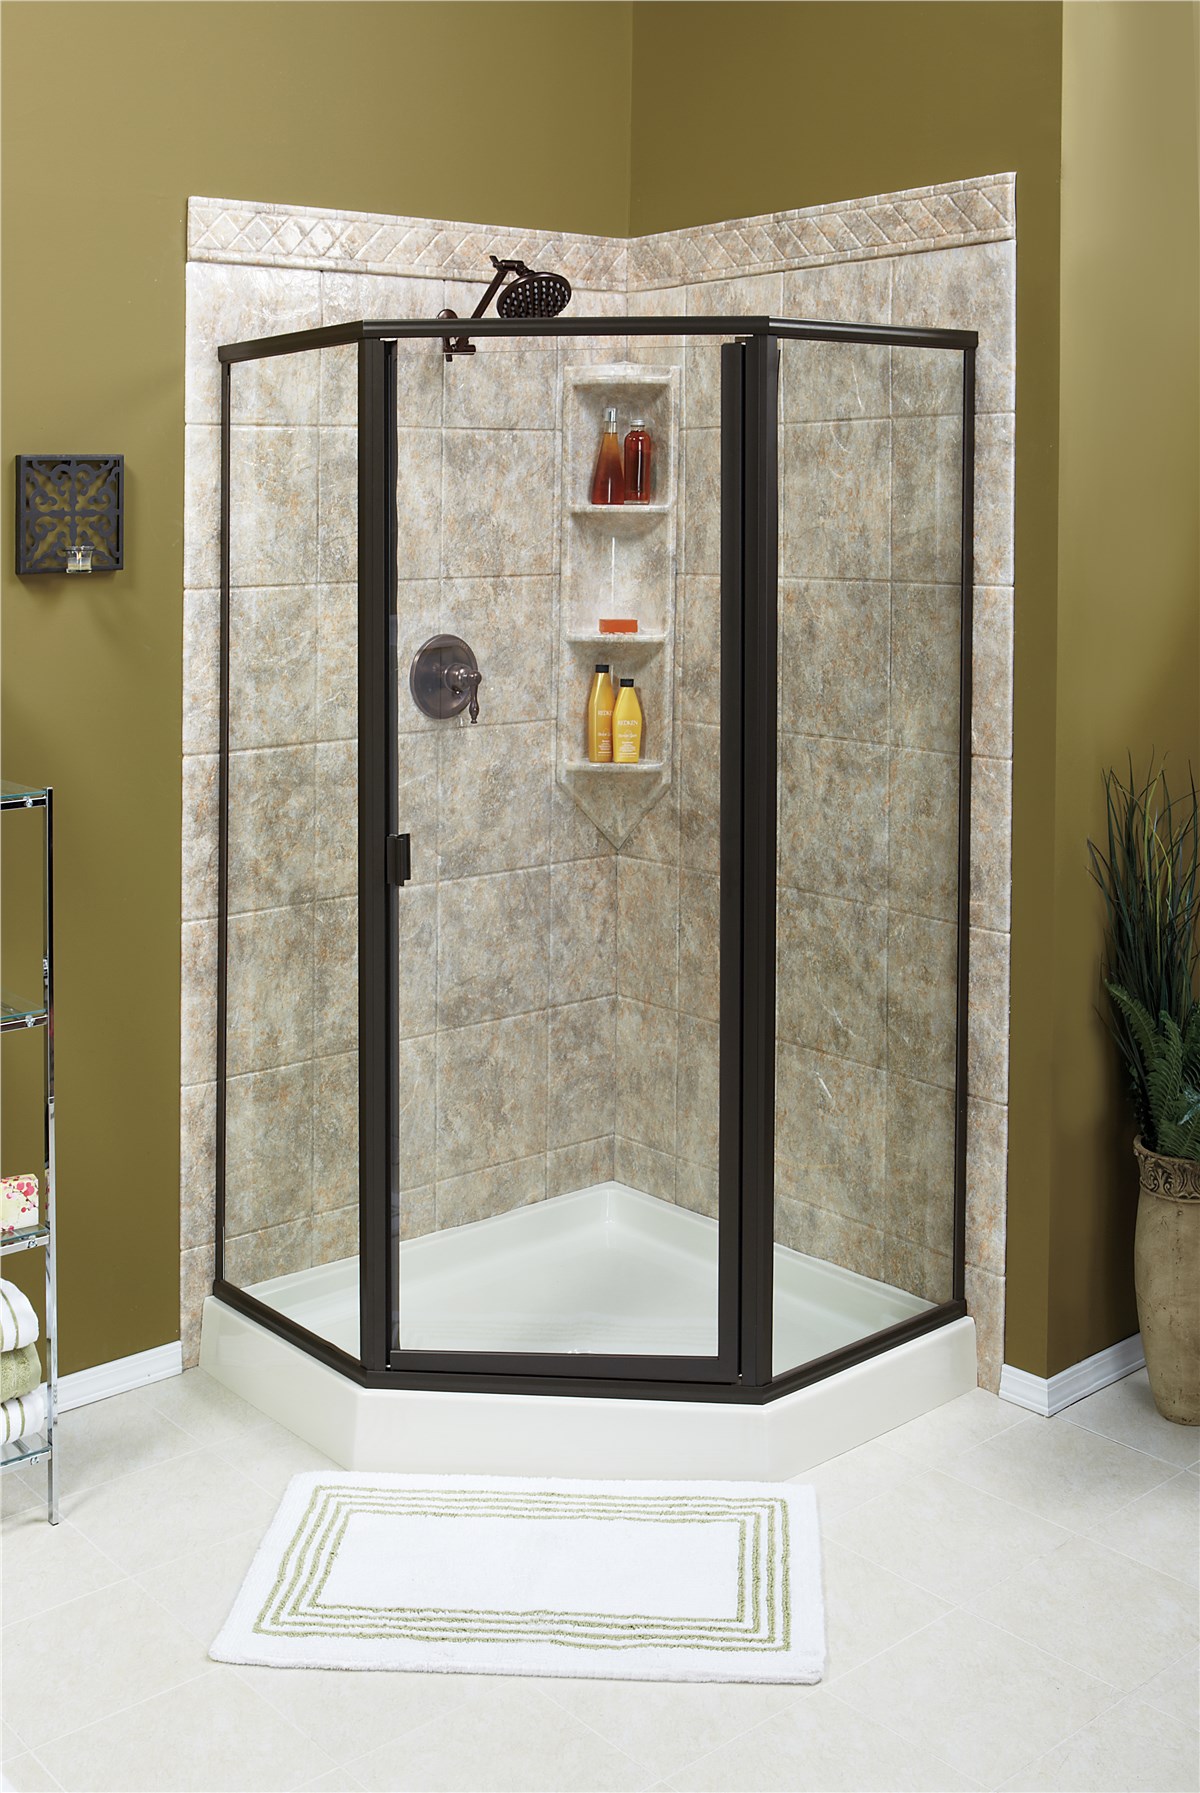 Lawton Tub To Shower Conversions Replace Tub With Shower Luxury Bath Of Texoma